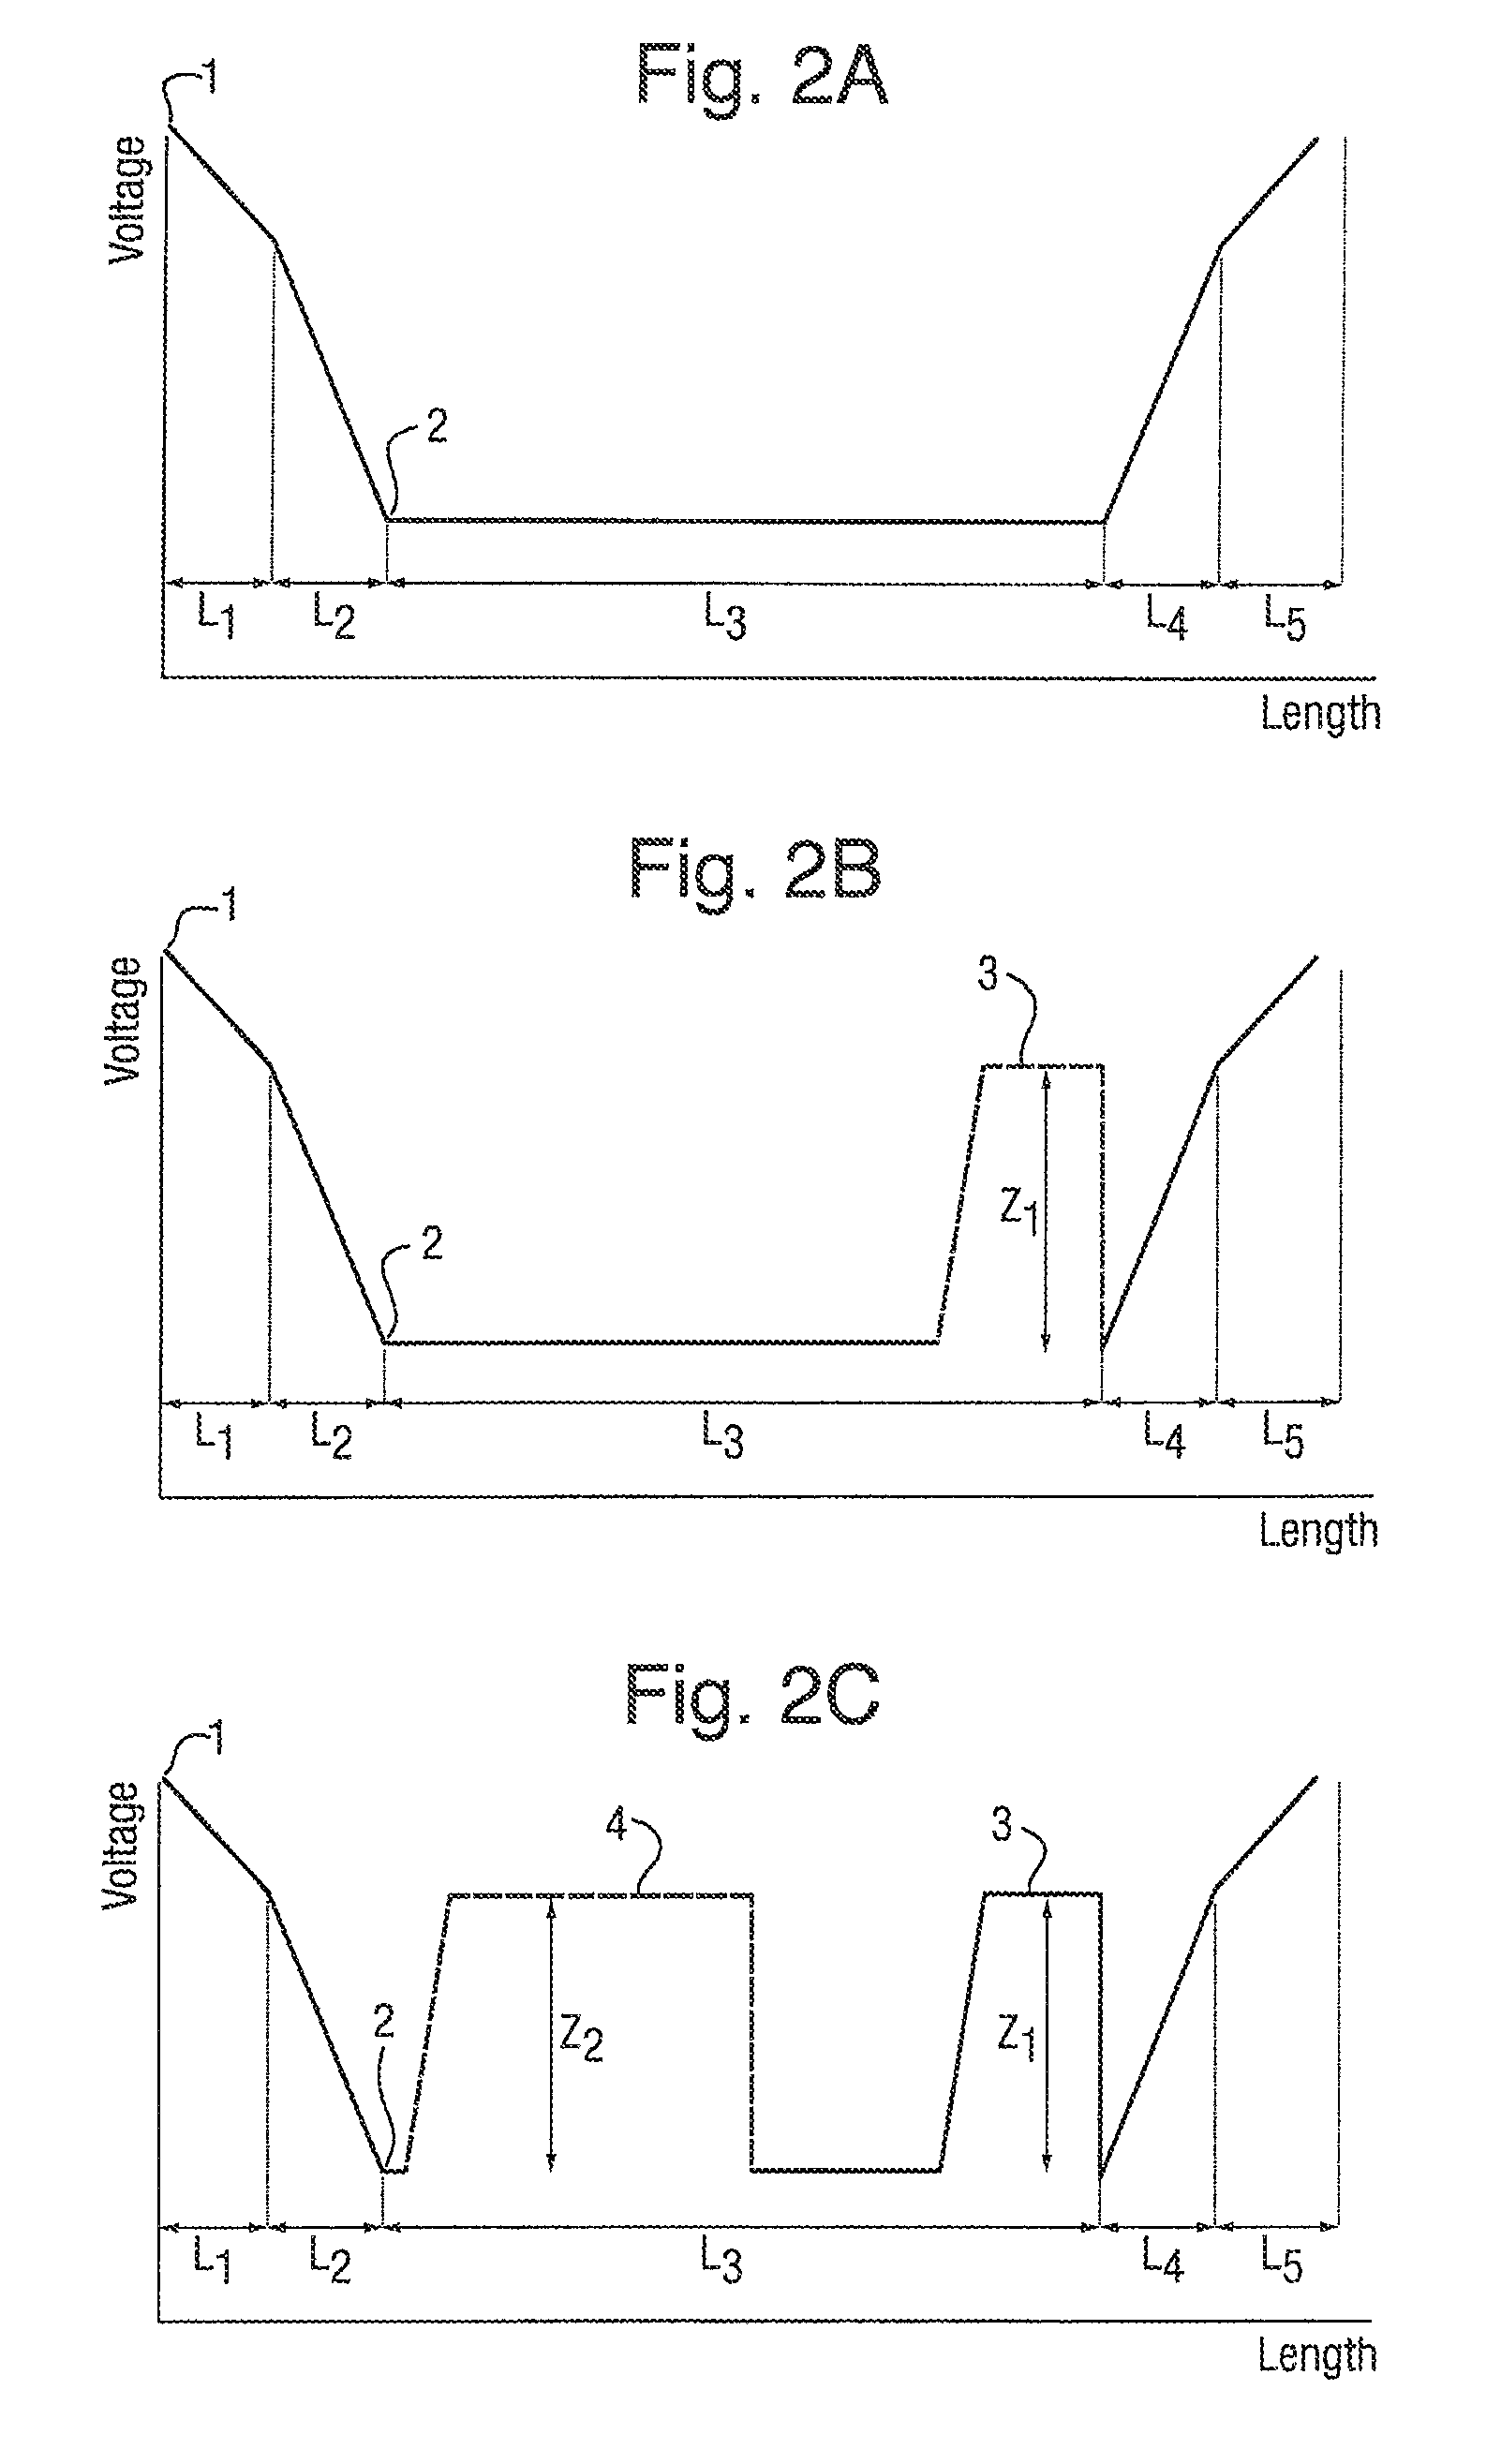 Mass spectrometers comprising accelerator devices